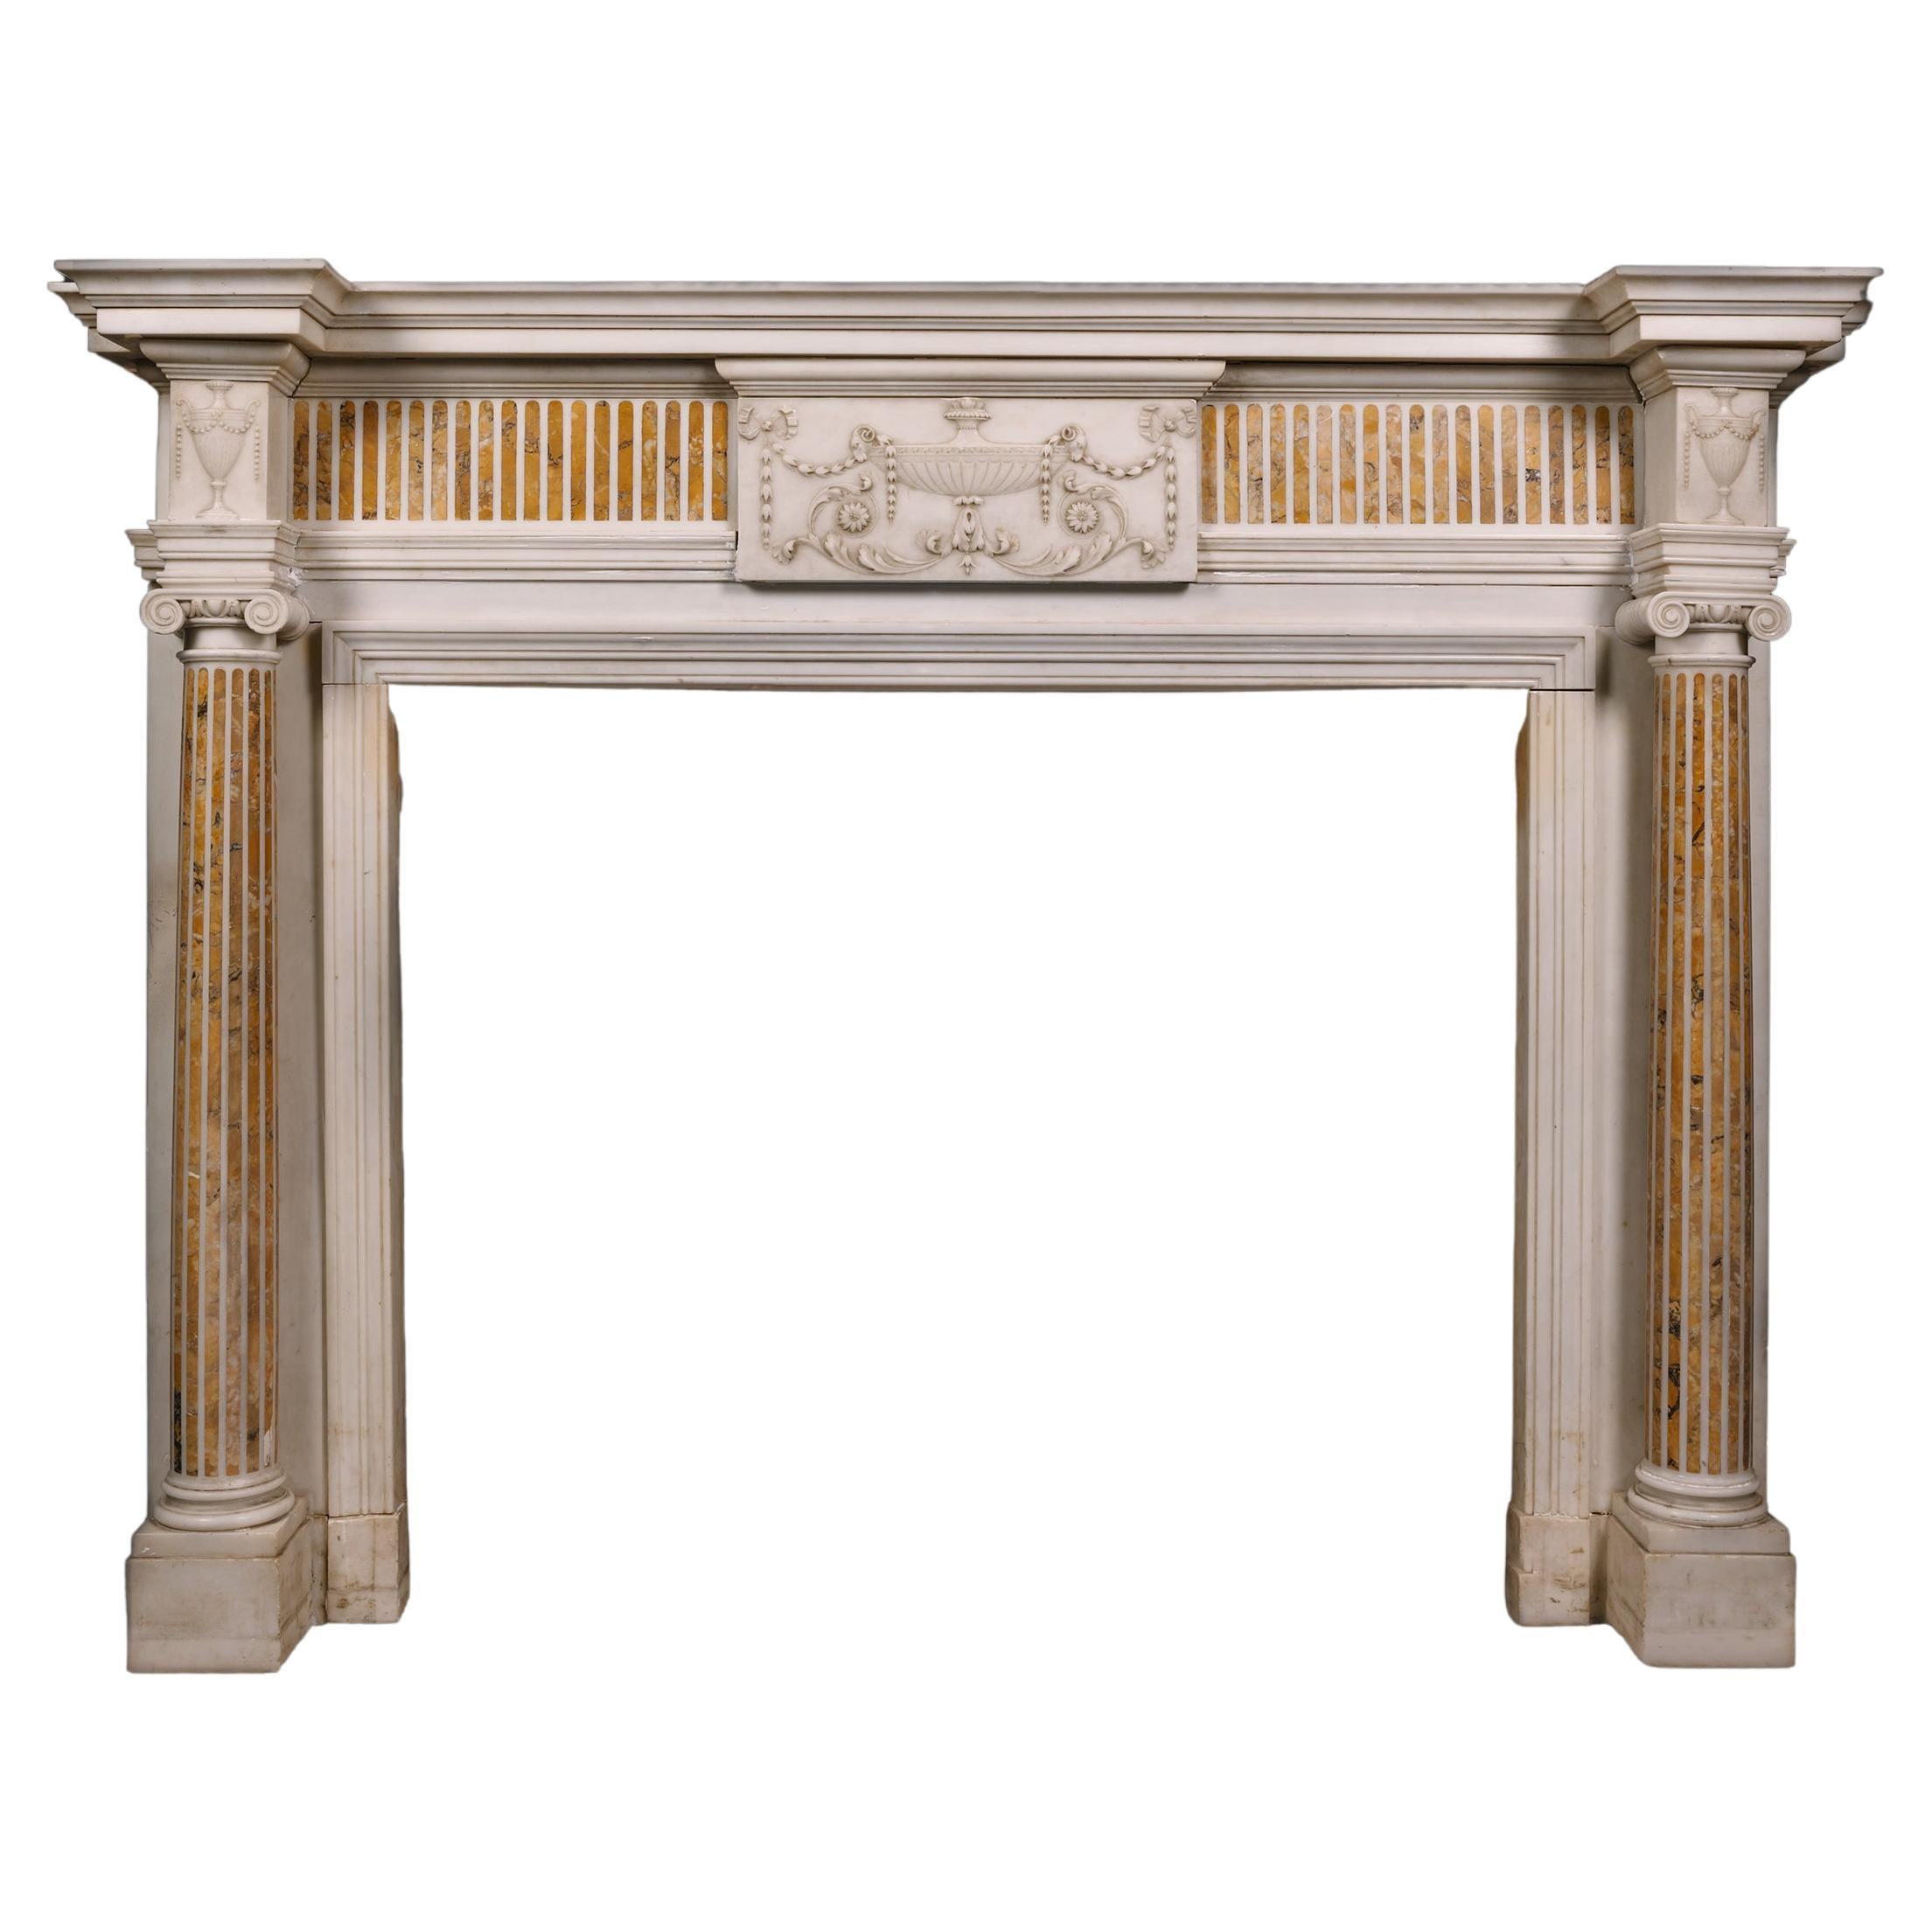 George III Period Carrara Marble and Sienna Marble Chimney Piece